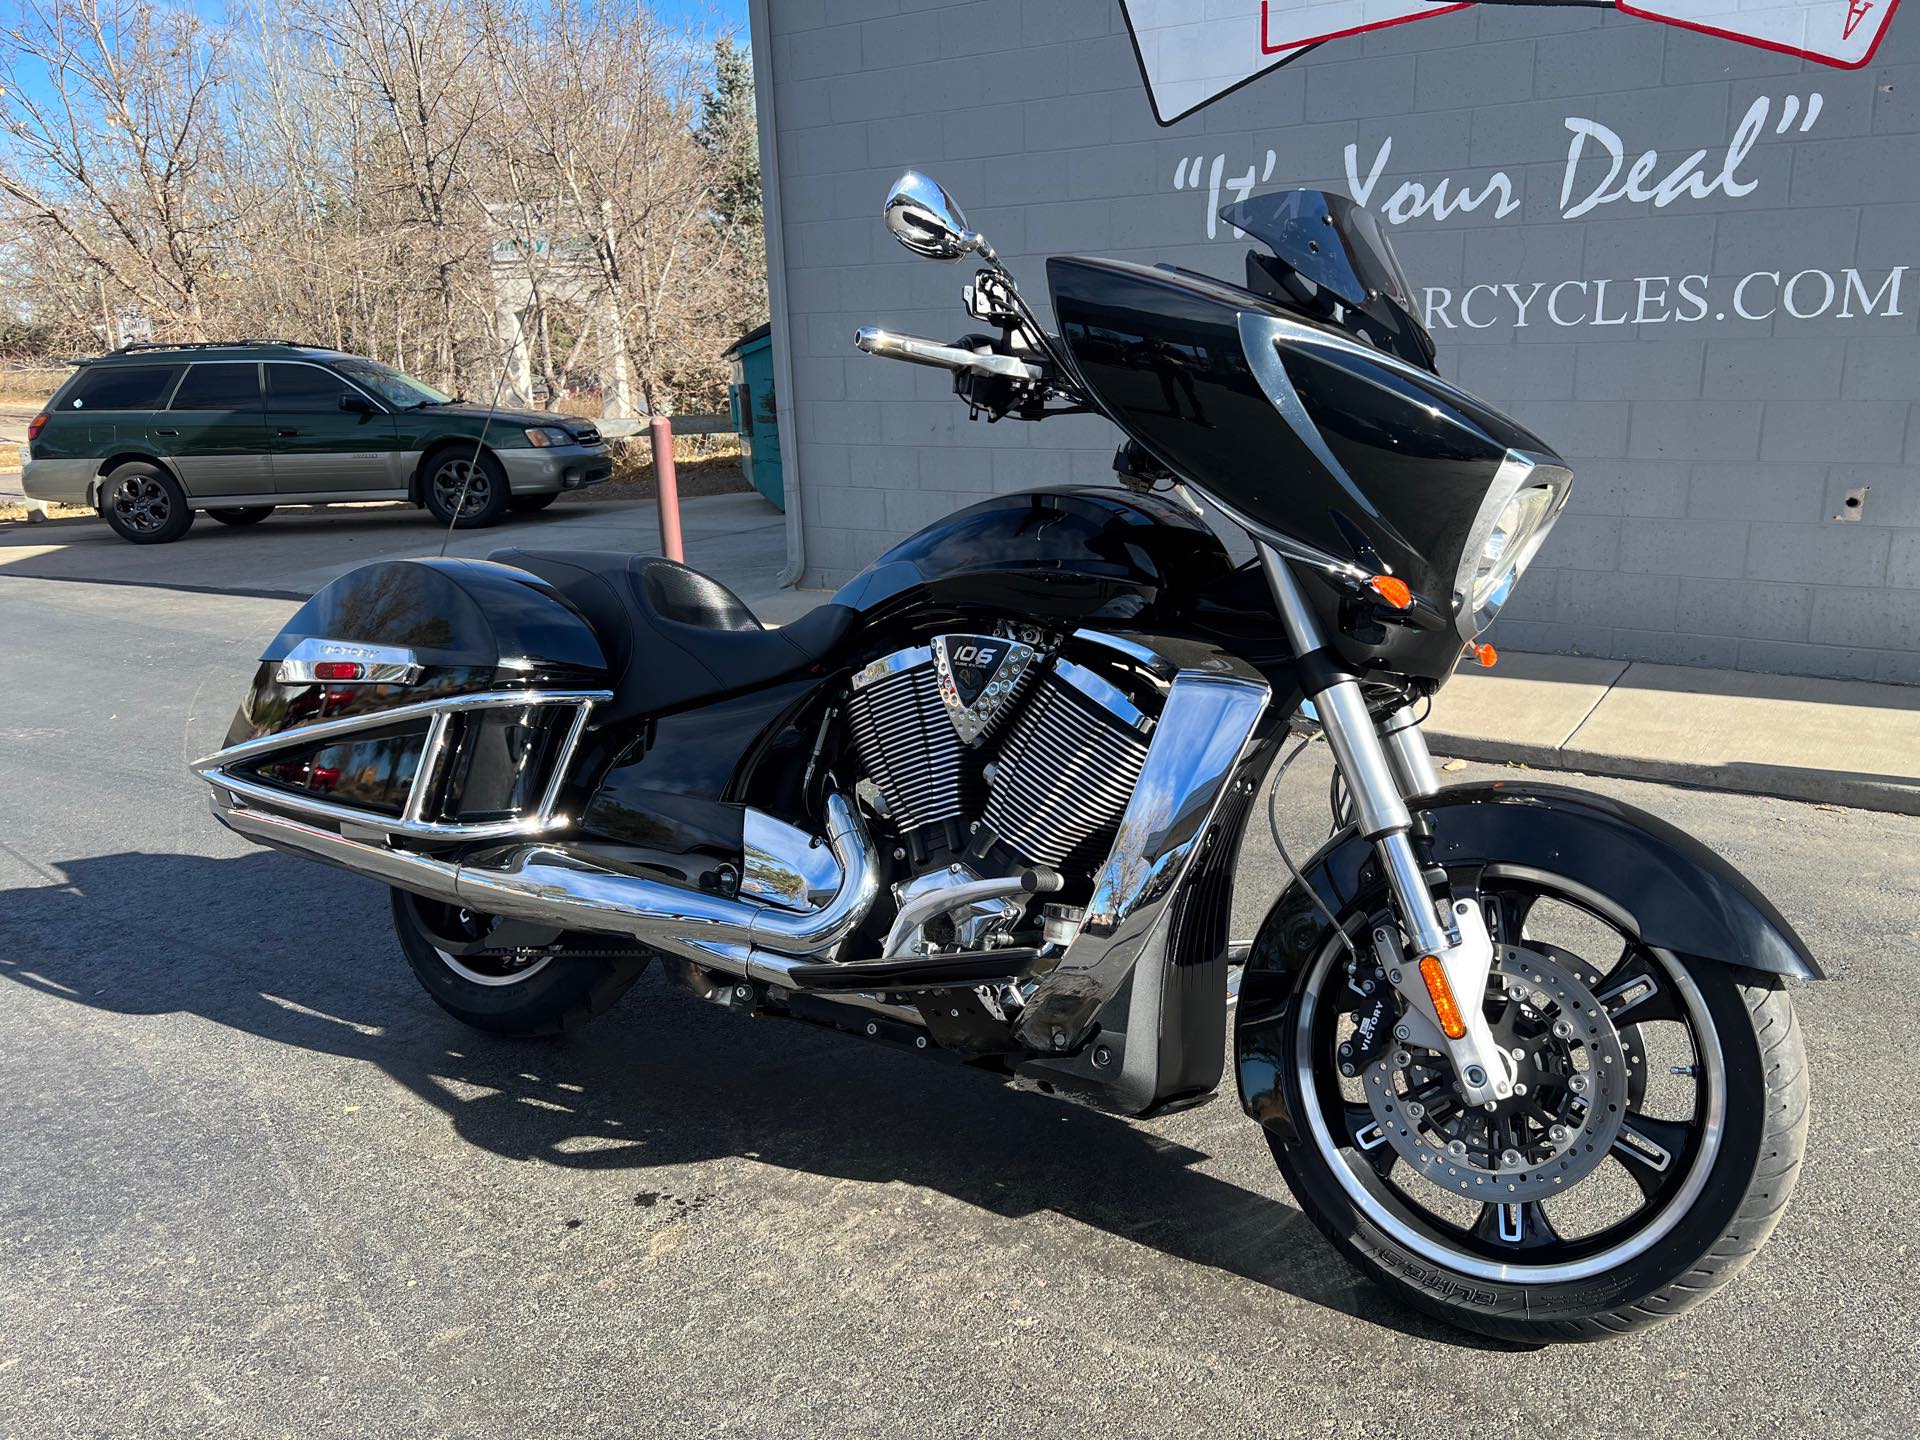 2017 Victory Cross Country Base at Aces Motorcycles - Fort Collins